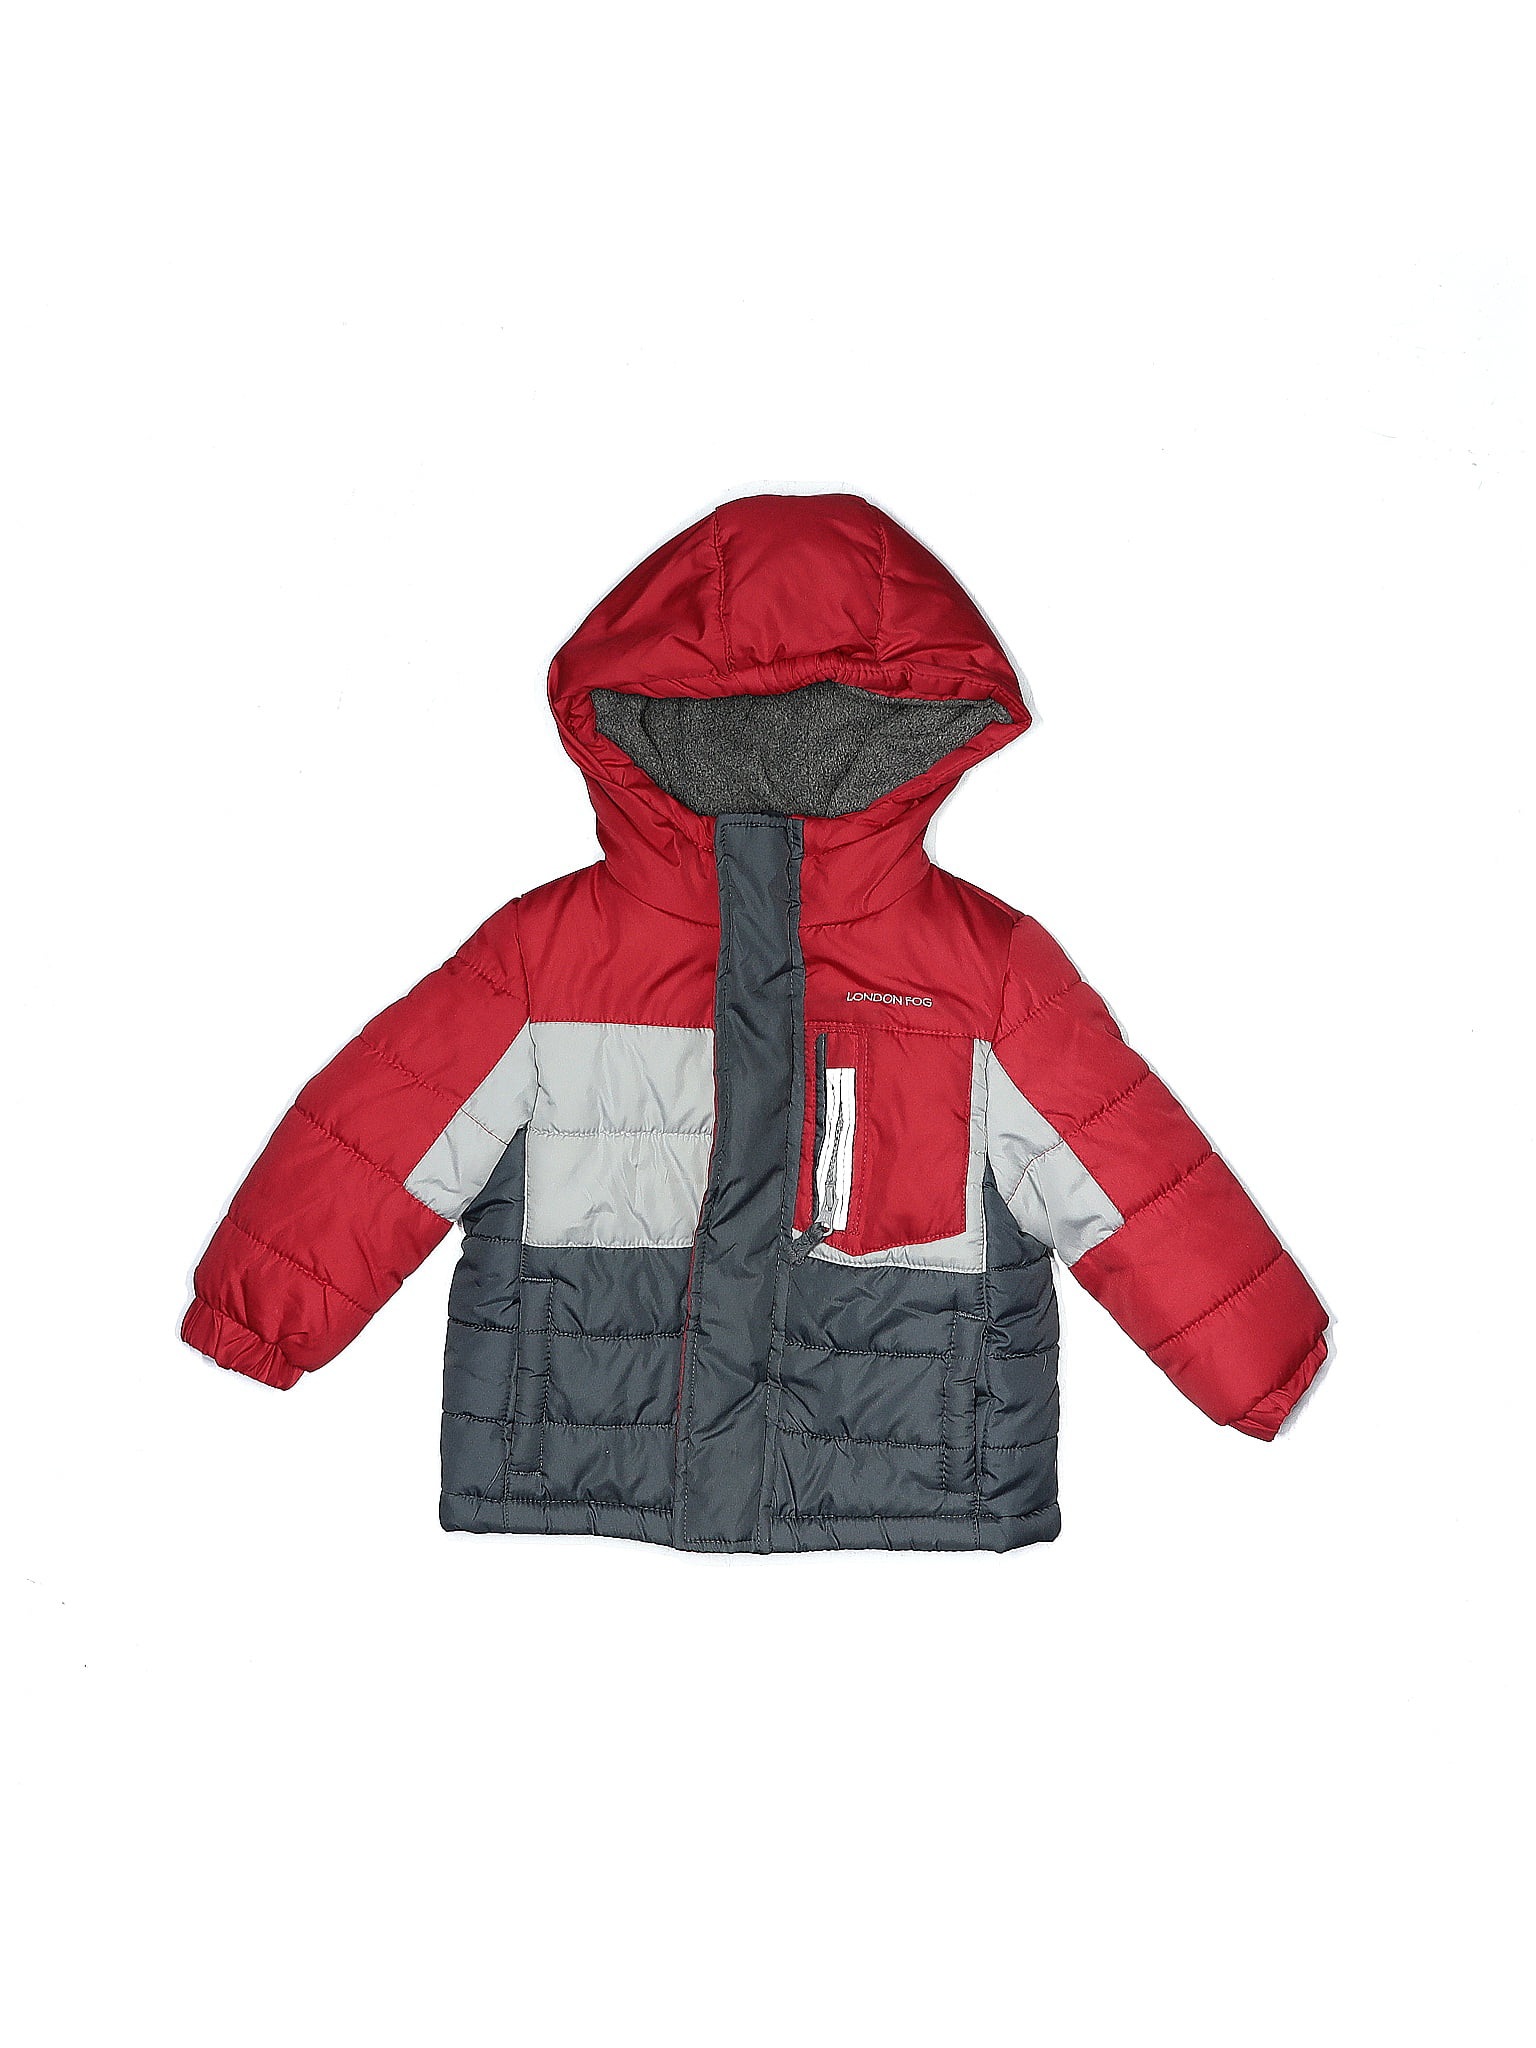 LONDON FOG Boys' Color Blocked Puffer Jacket Coat with Hat